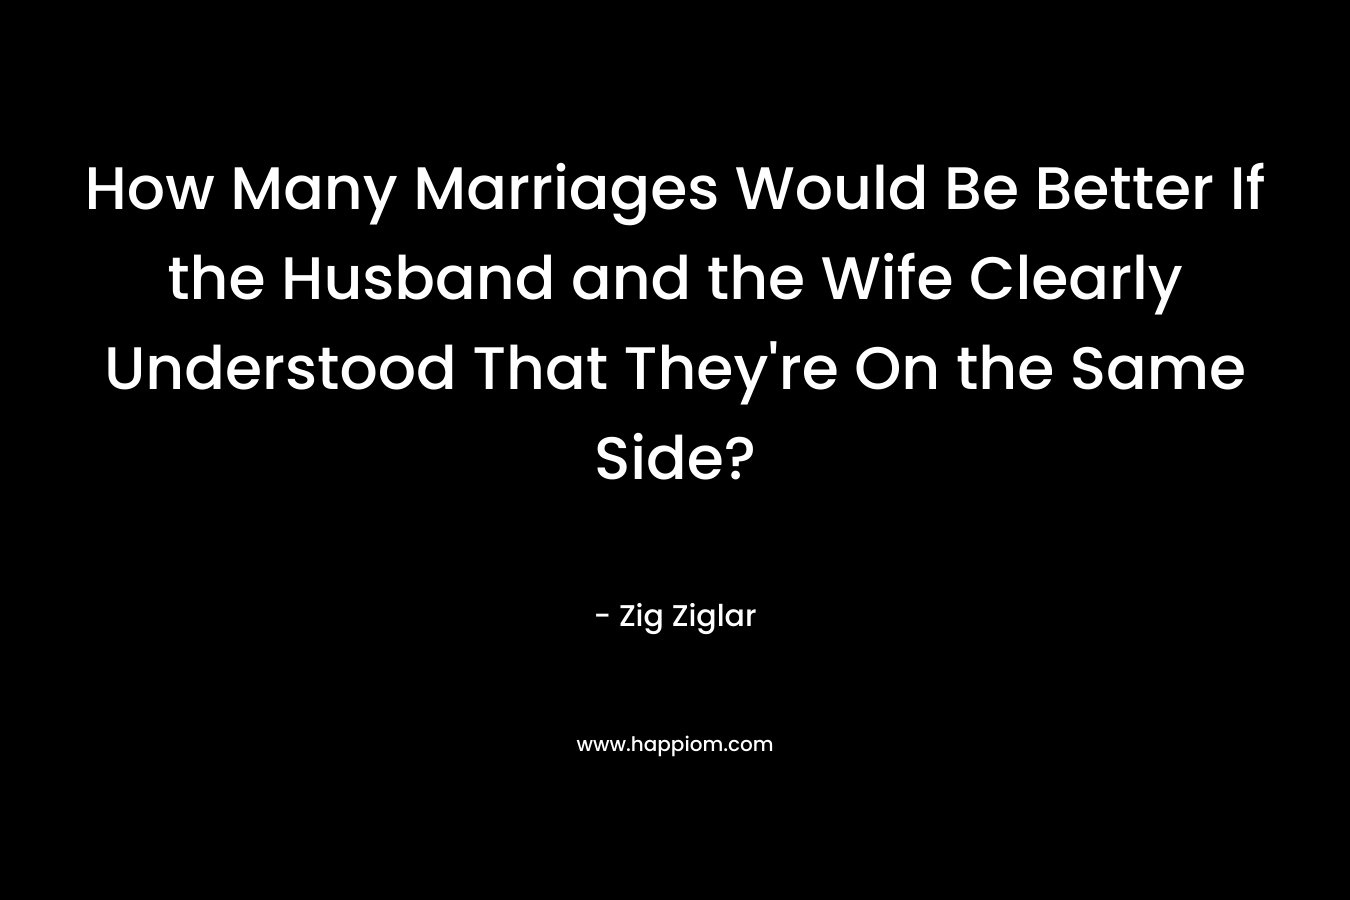 How Many Marriages Would Be Better If the Husband and the Wife Clearly Understood That They’re On the Same Side? – Zig Ziglar